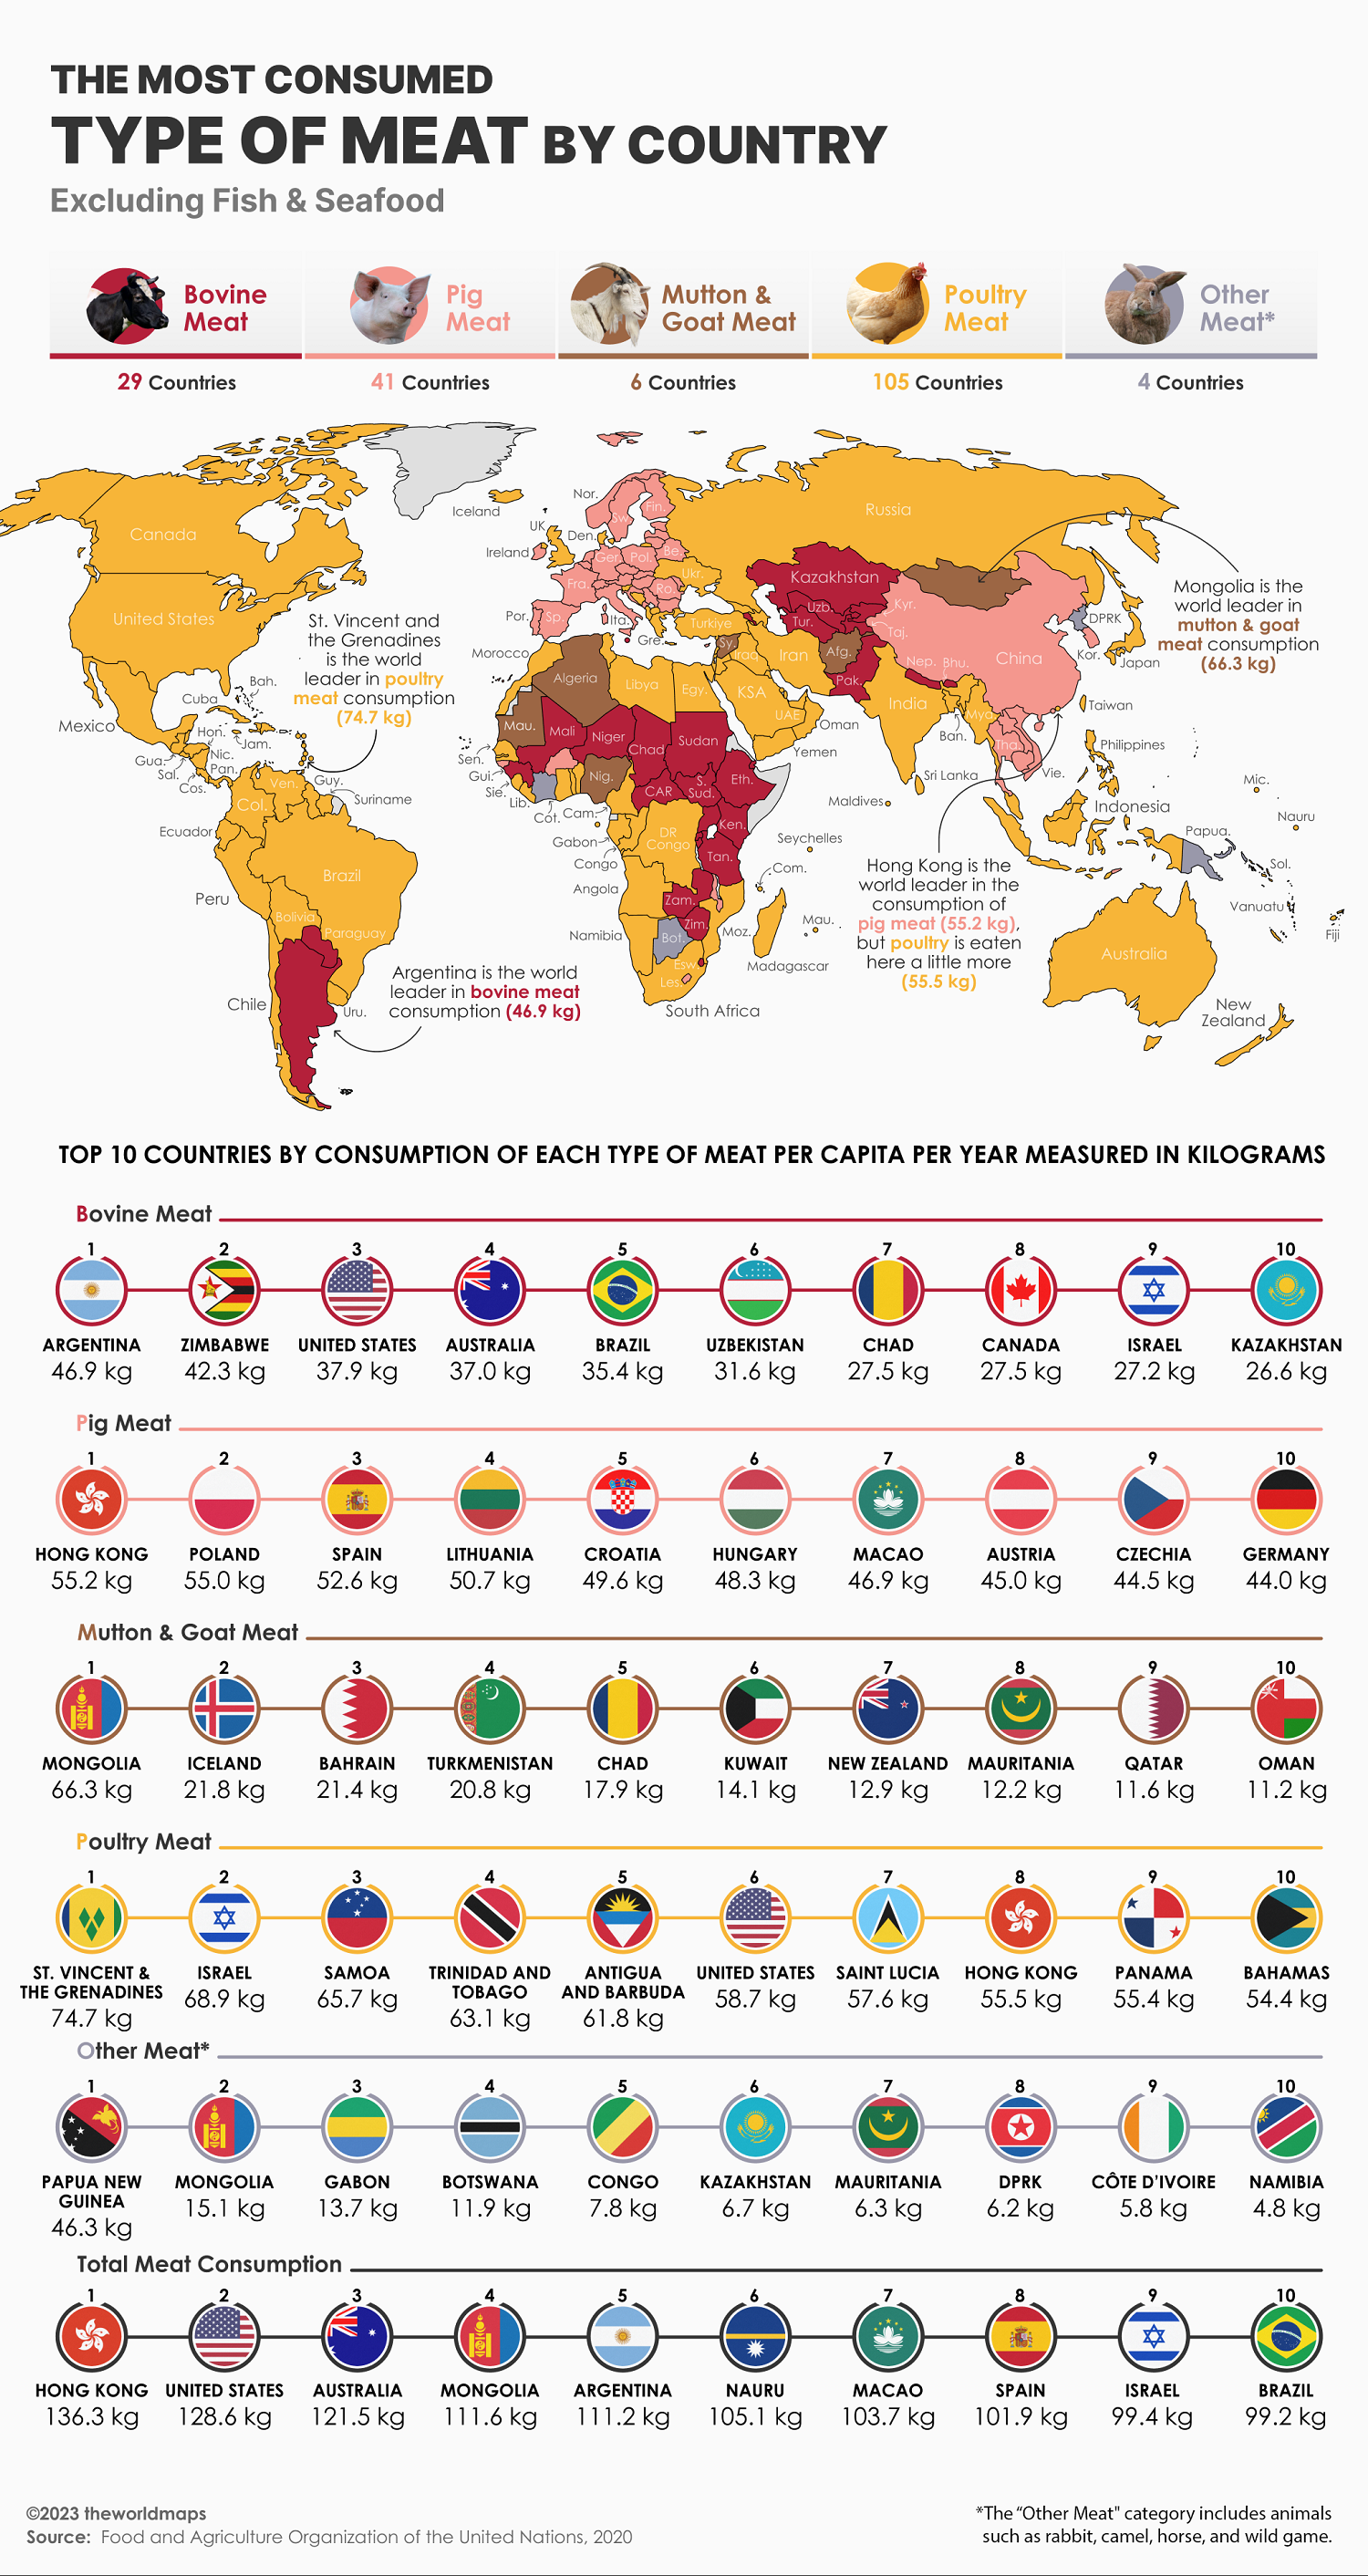 A map detailing meat consumption by country, but excluding fish & seafood.